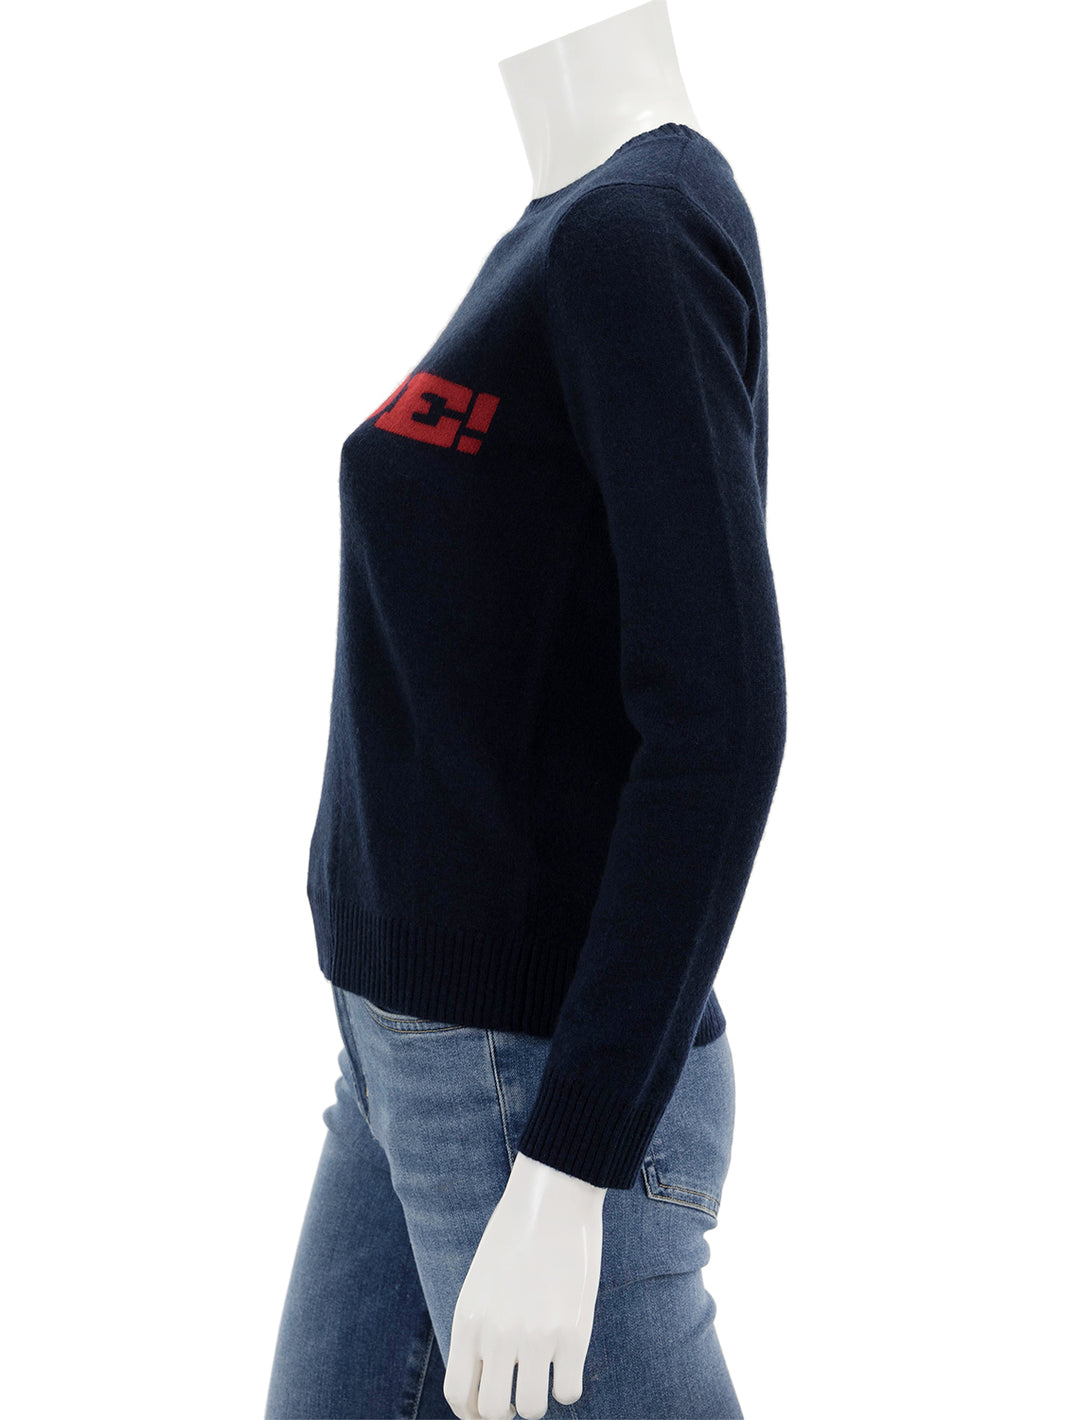 Side view of Jumper 1234's merde sweater in navy and red.